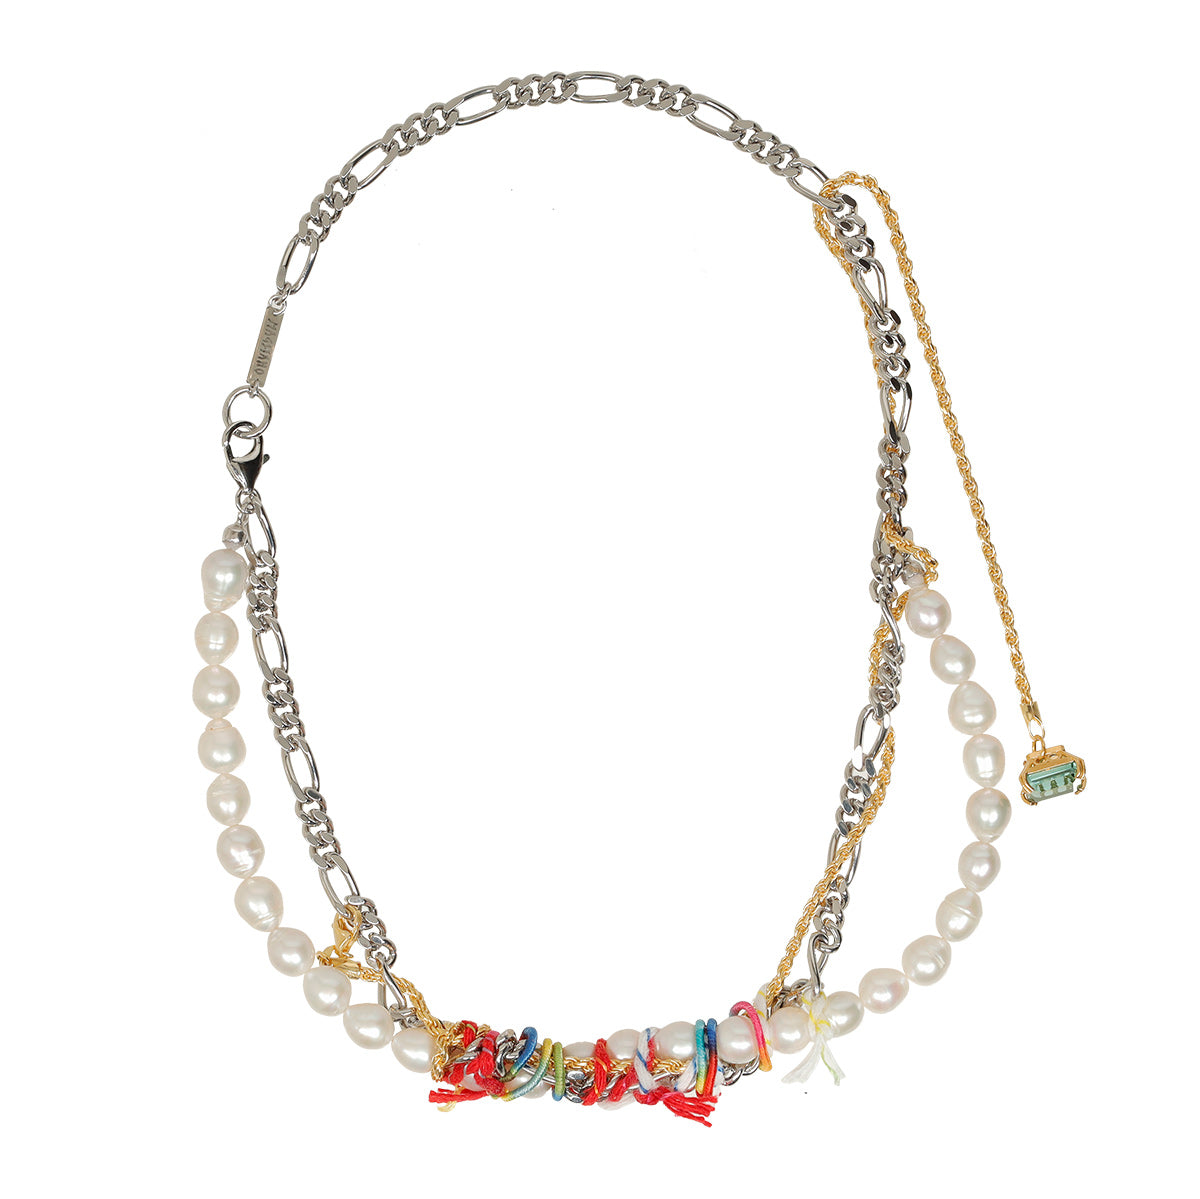 Magliano - ANOTHER MESS NECKLACEIA PATRIZIA NEZCKLACE Necklace